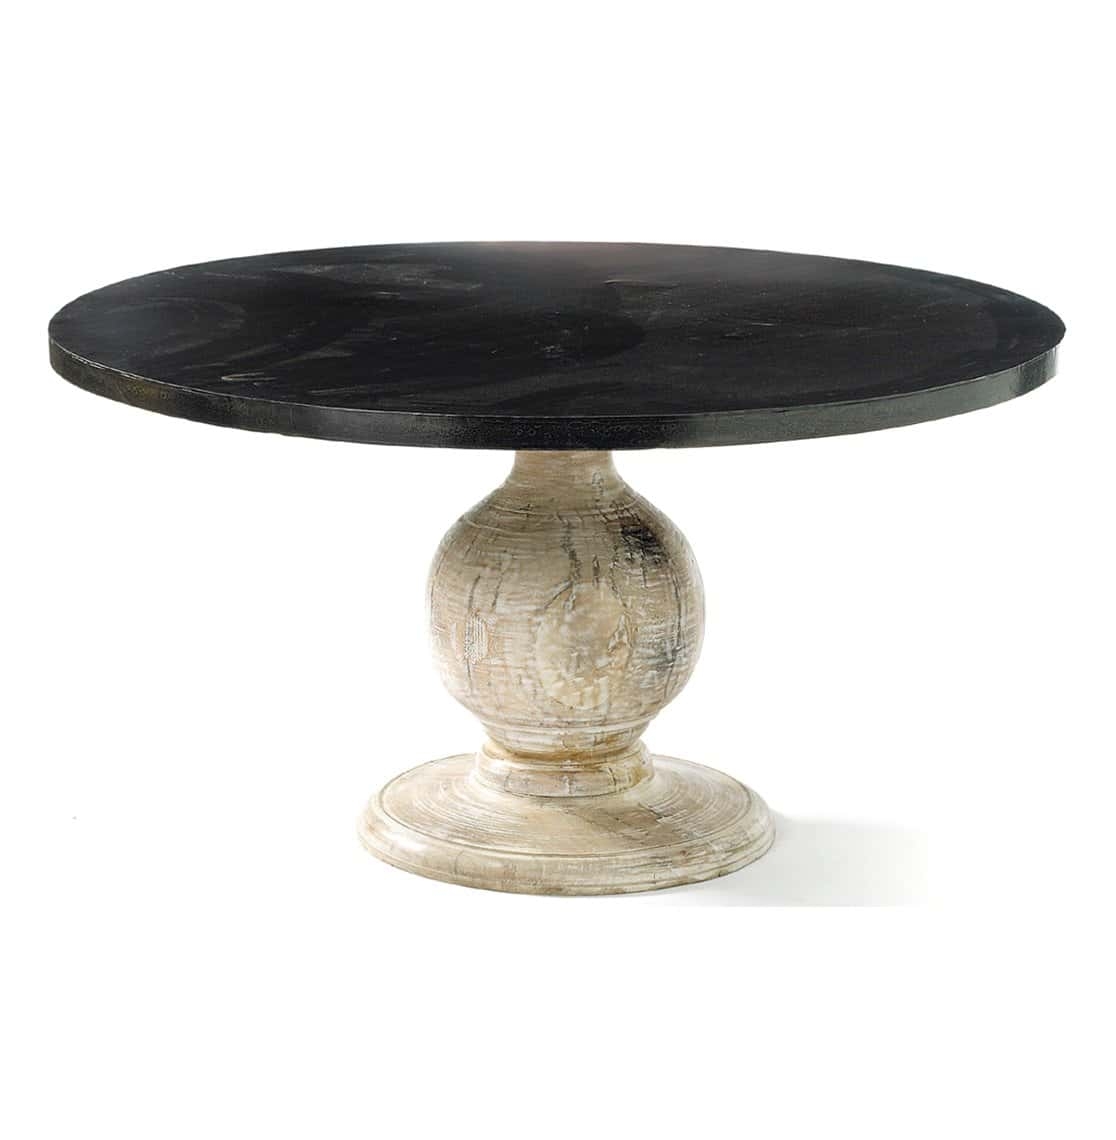 Black steel round dining table with cream wood base dining